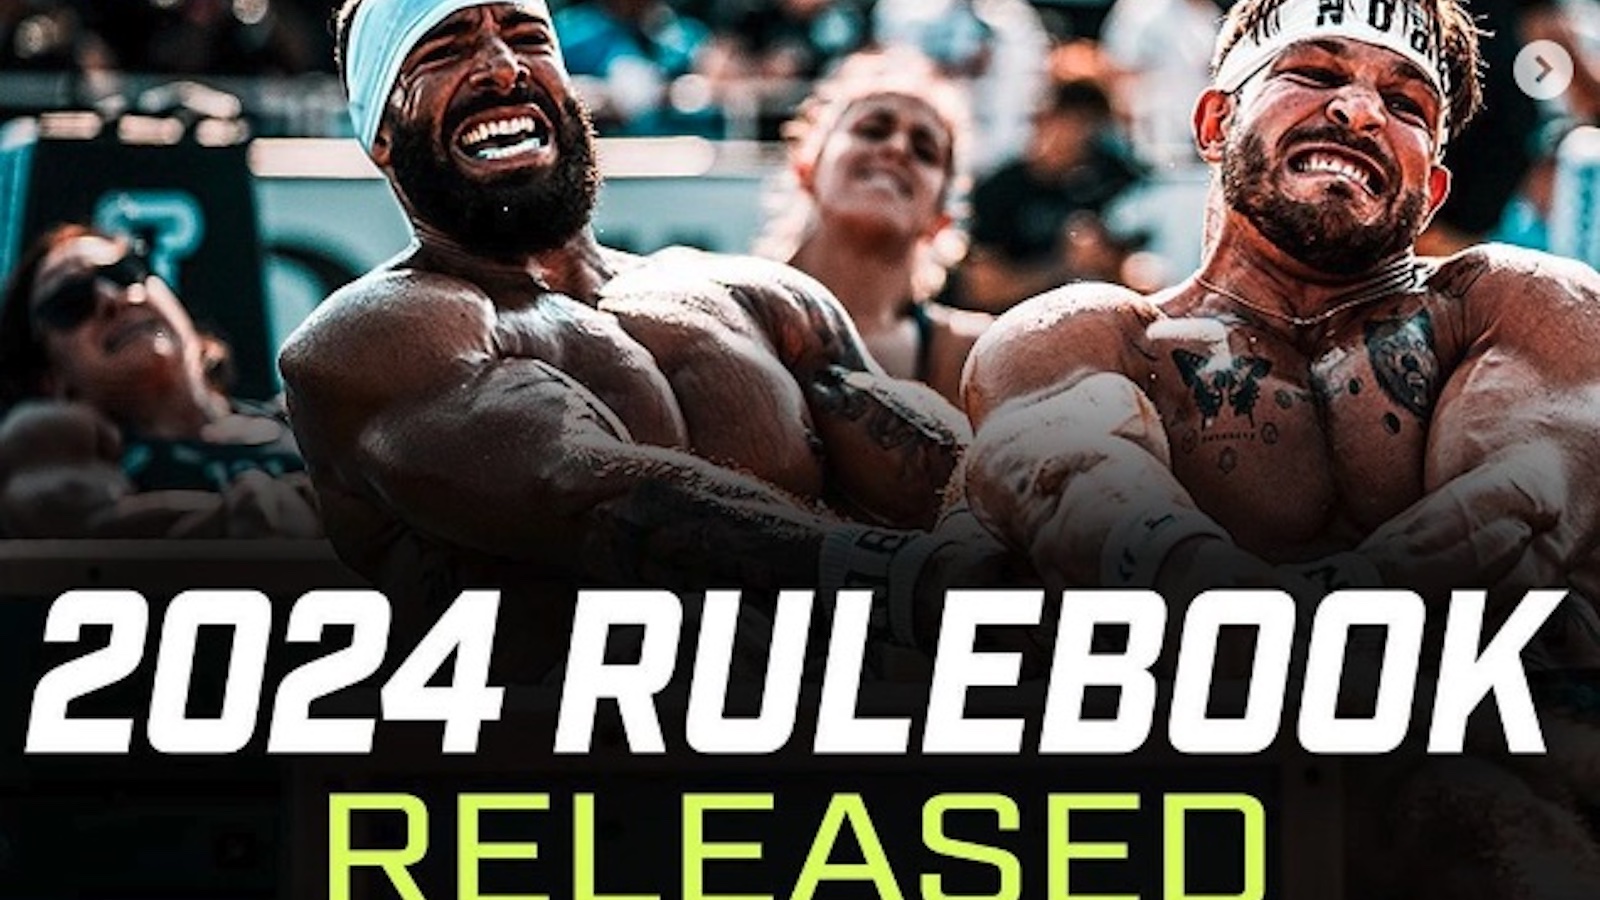 4 Takeaways From the 2024 CrossFit Season Competition Rulebook